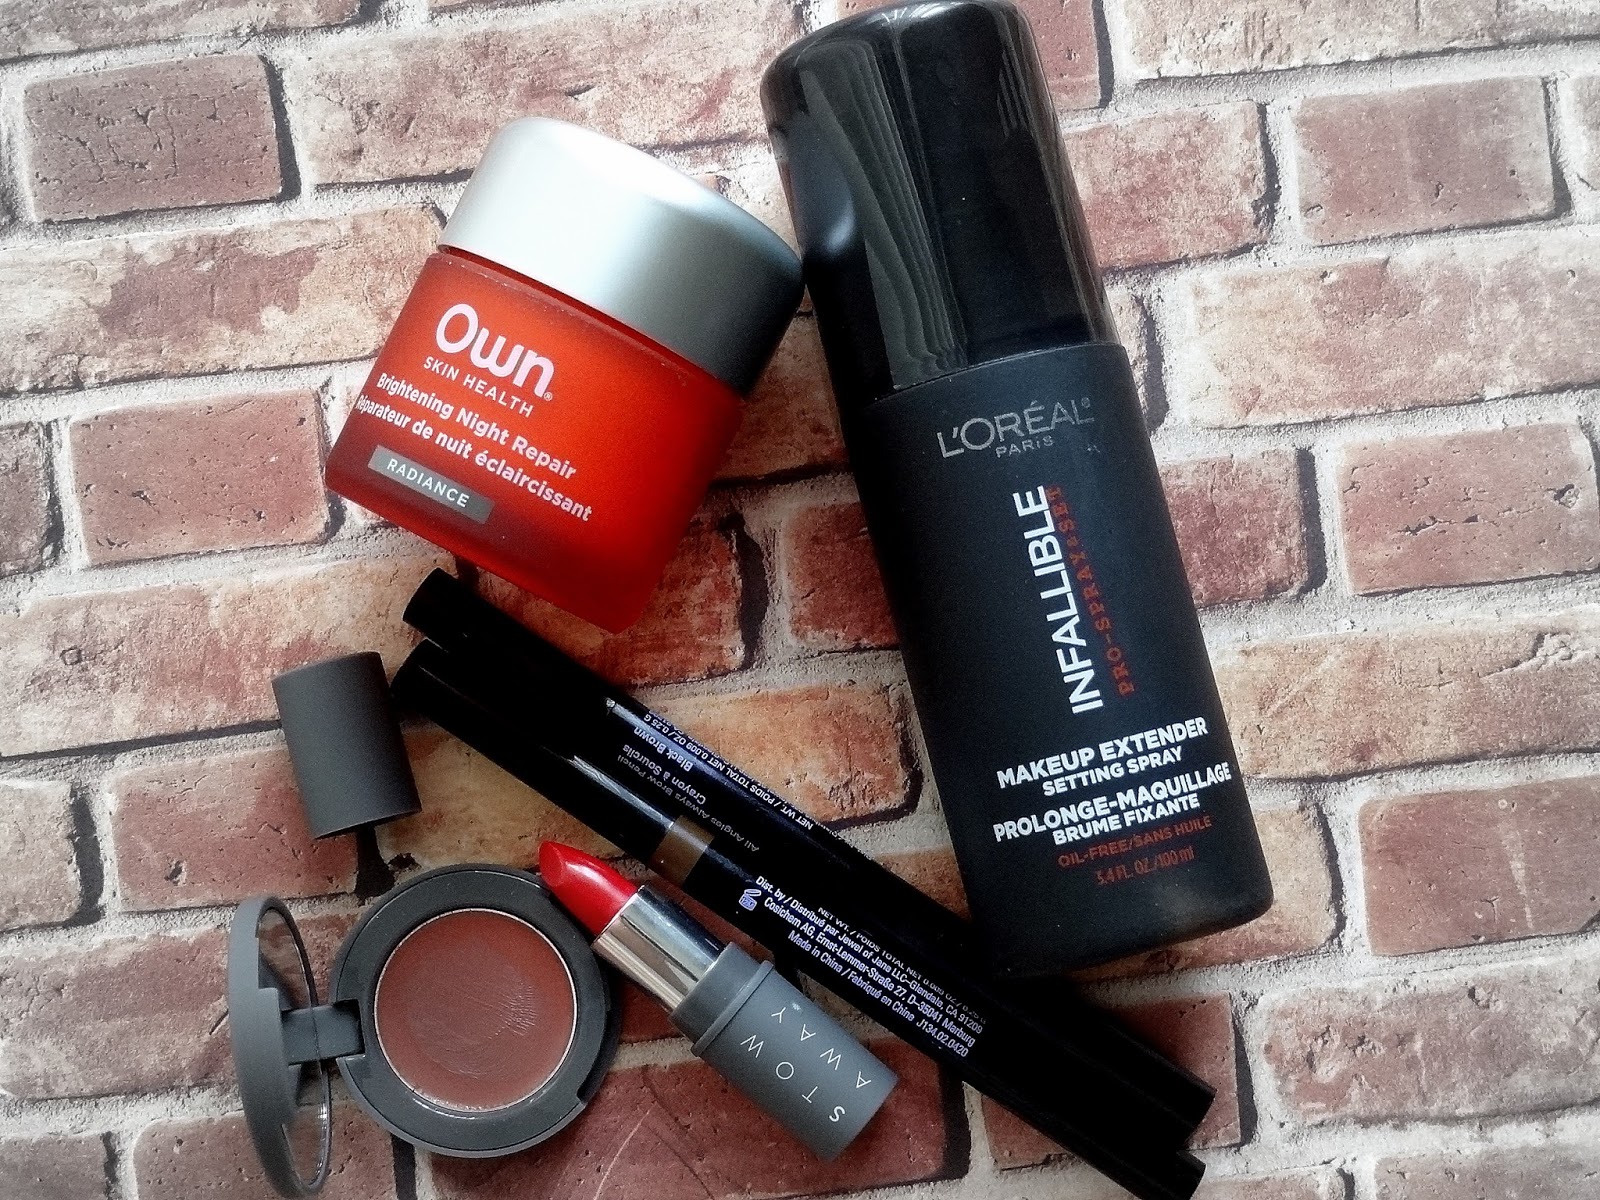 Quick Reviews - Stowaway Cosmetics, L'Oreal, Jane, Own